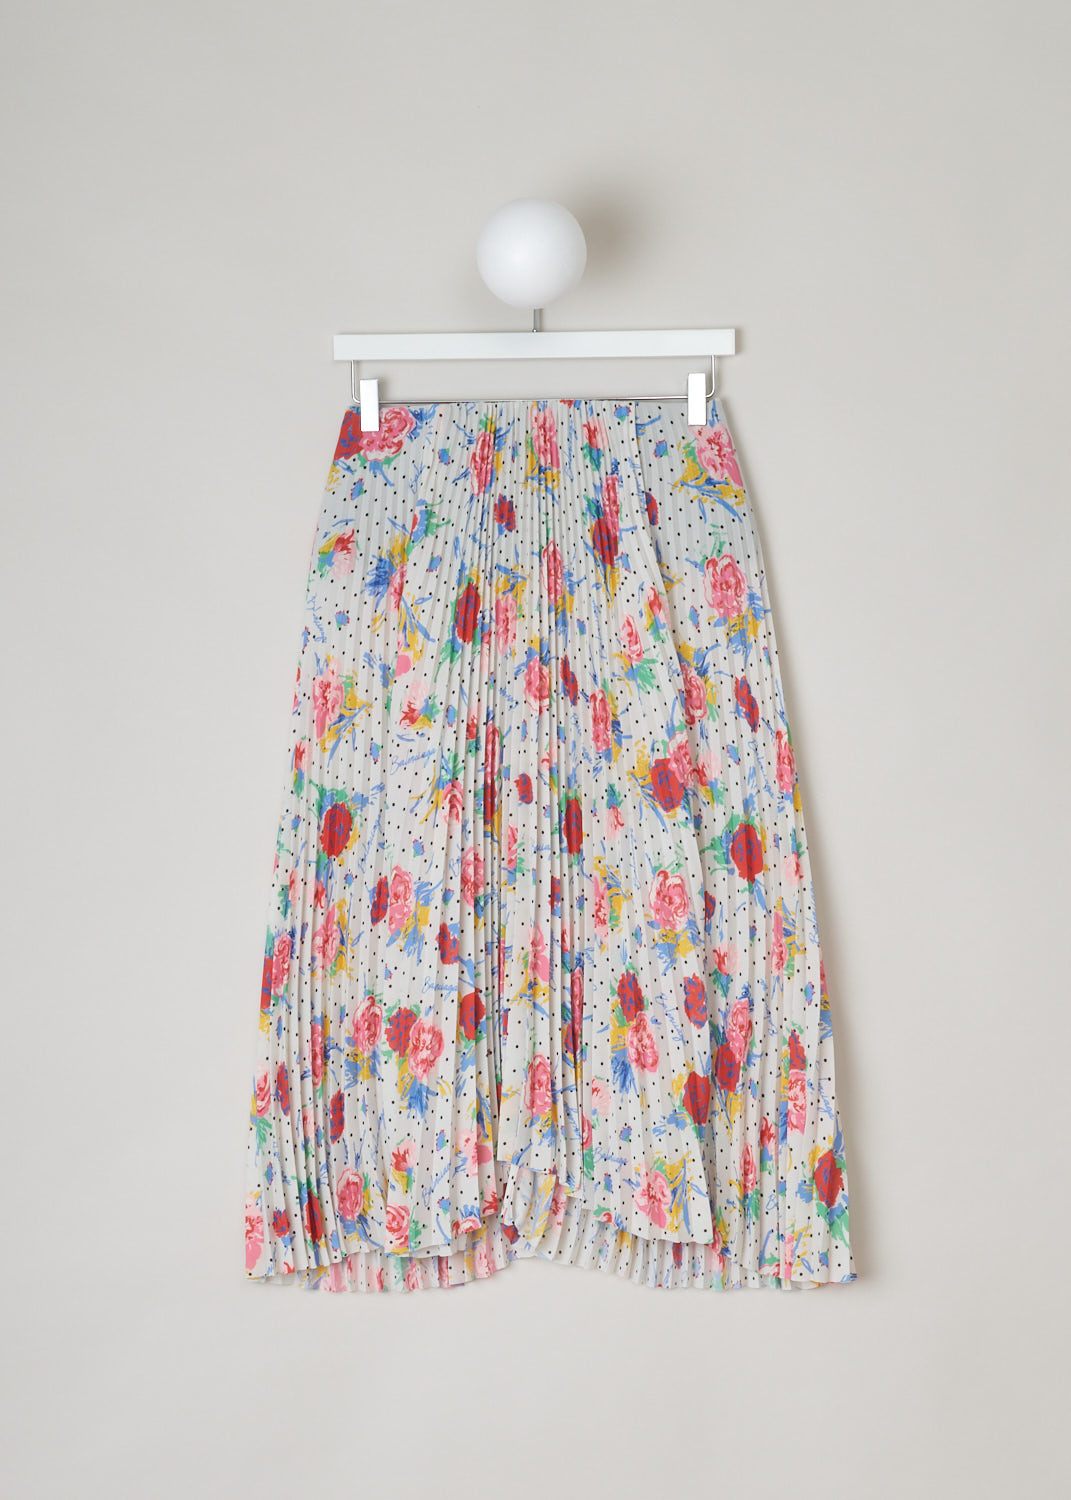 Balenciaga, Polka dot floral plissé skirt, 601169_THL07_9701, white red yellow green blue, front. This high-waisted multi-colored plissé skirt comes with a floral design pattern and polka dots through-out. The closure options on this piece are 2 metal hooks and beneath that a concealed zipper.